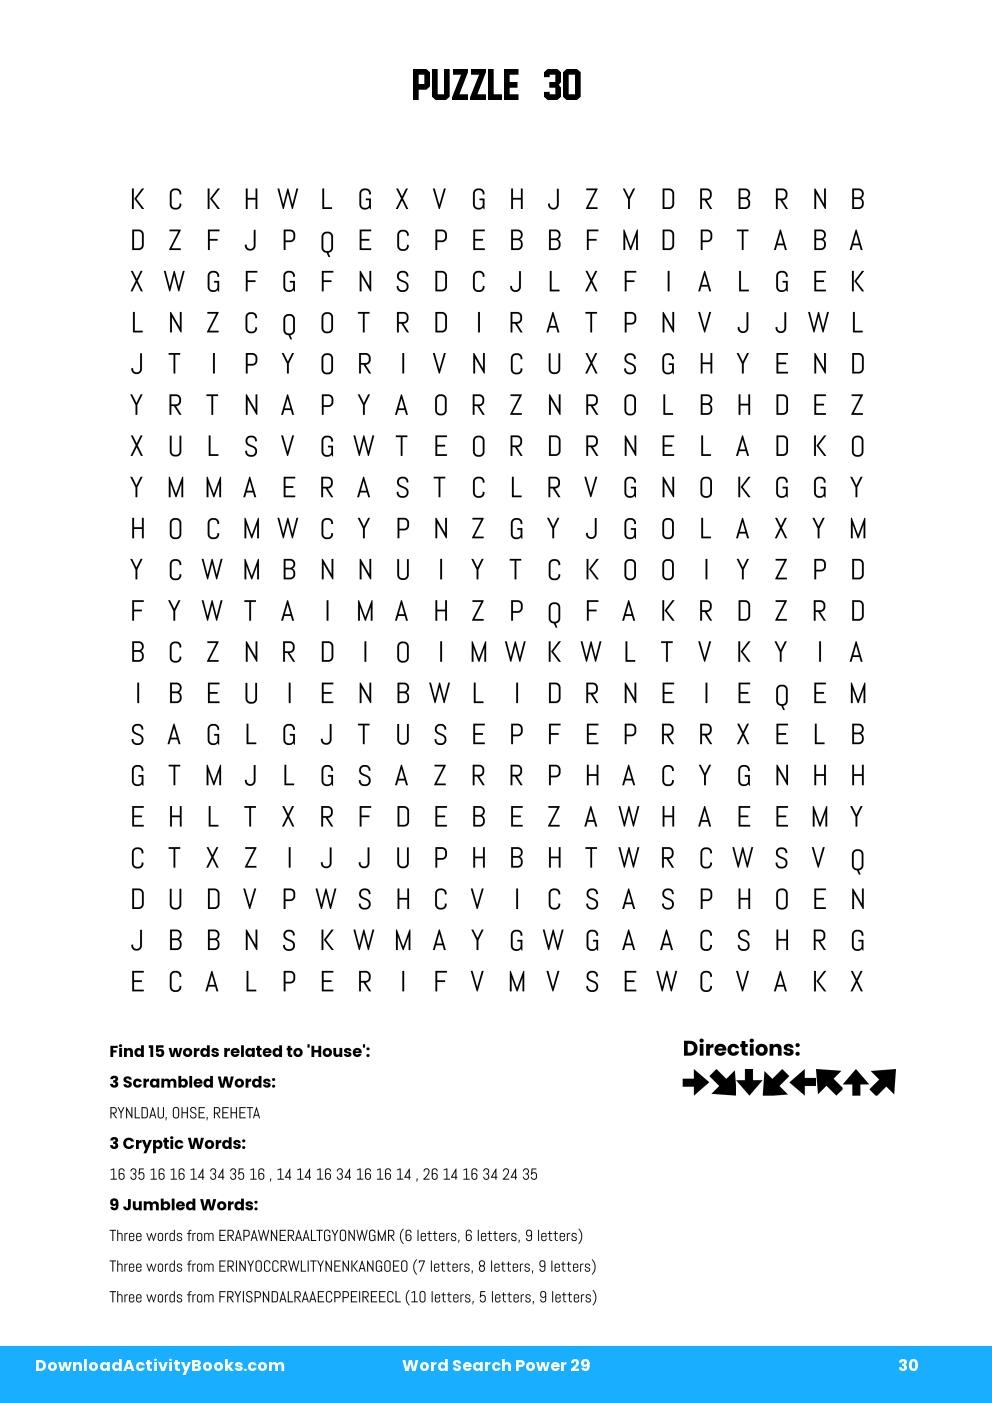 Word Search Power in Word Search Power 29